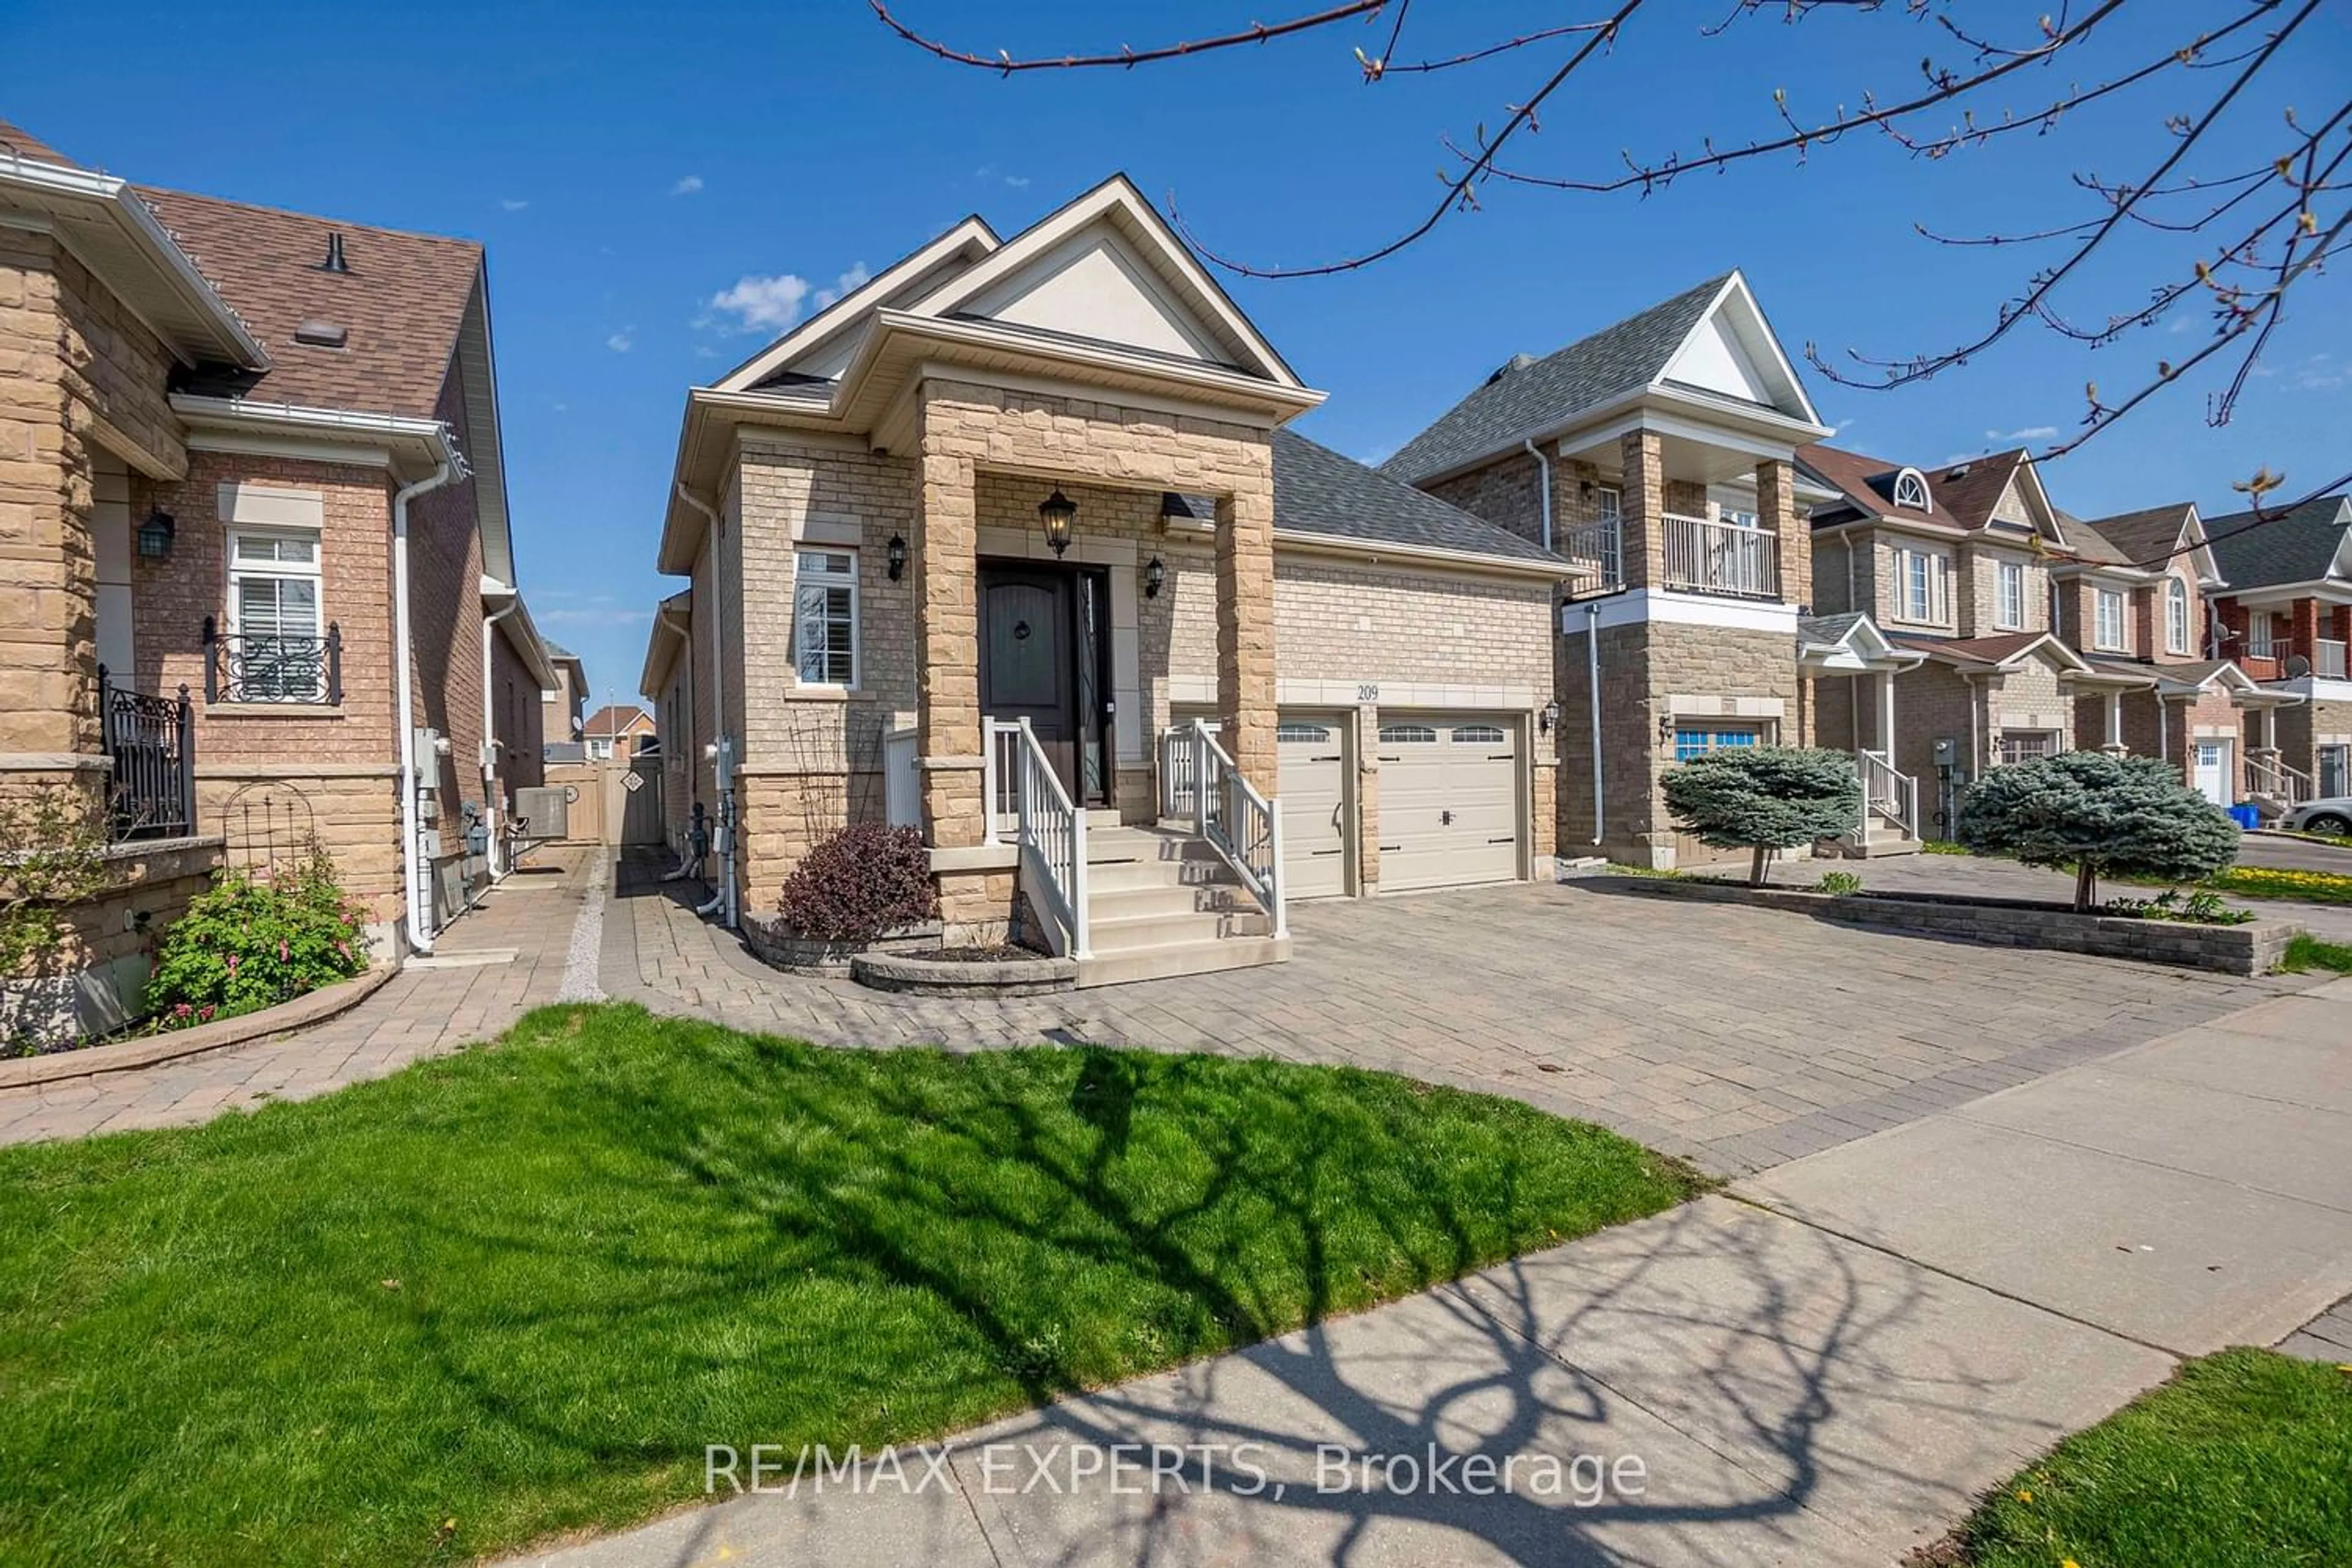 Frontside or backside of a home for 209 Vellore Park Ave, Vaughan Ontario L4H 0C3